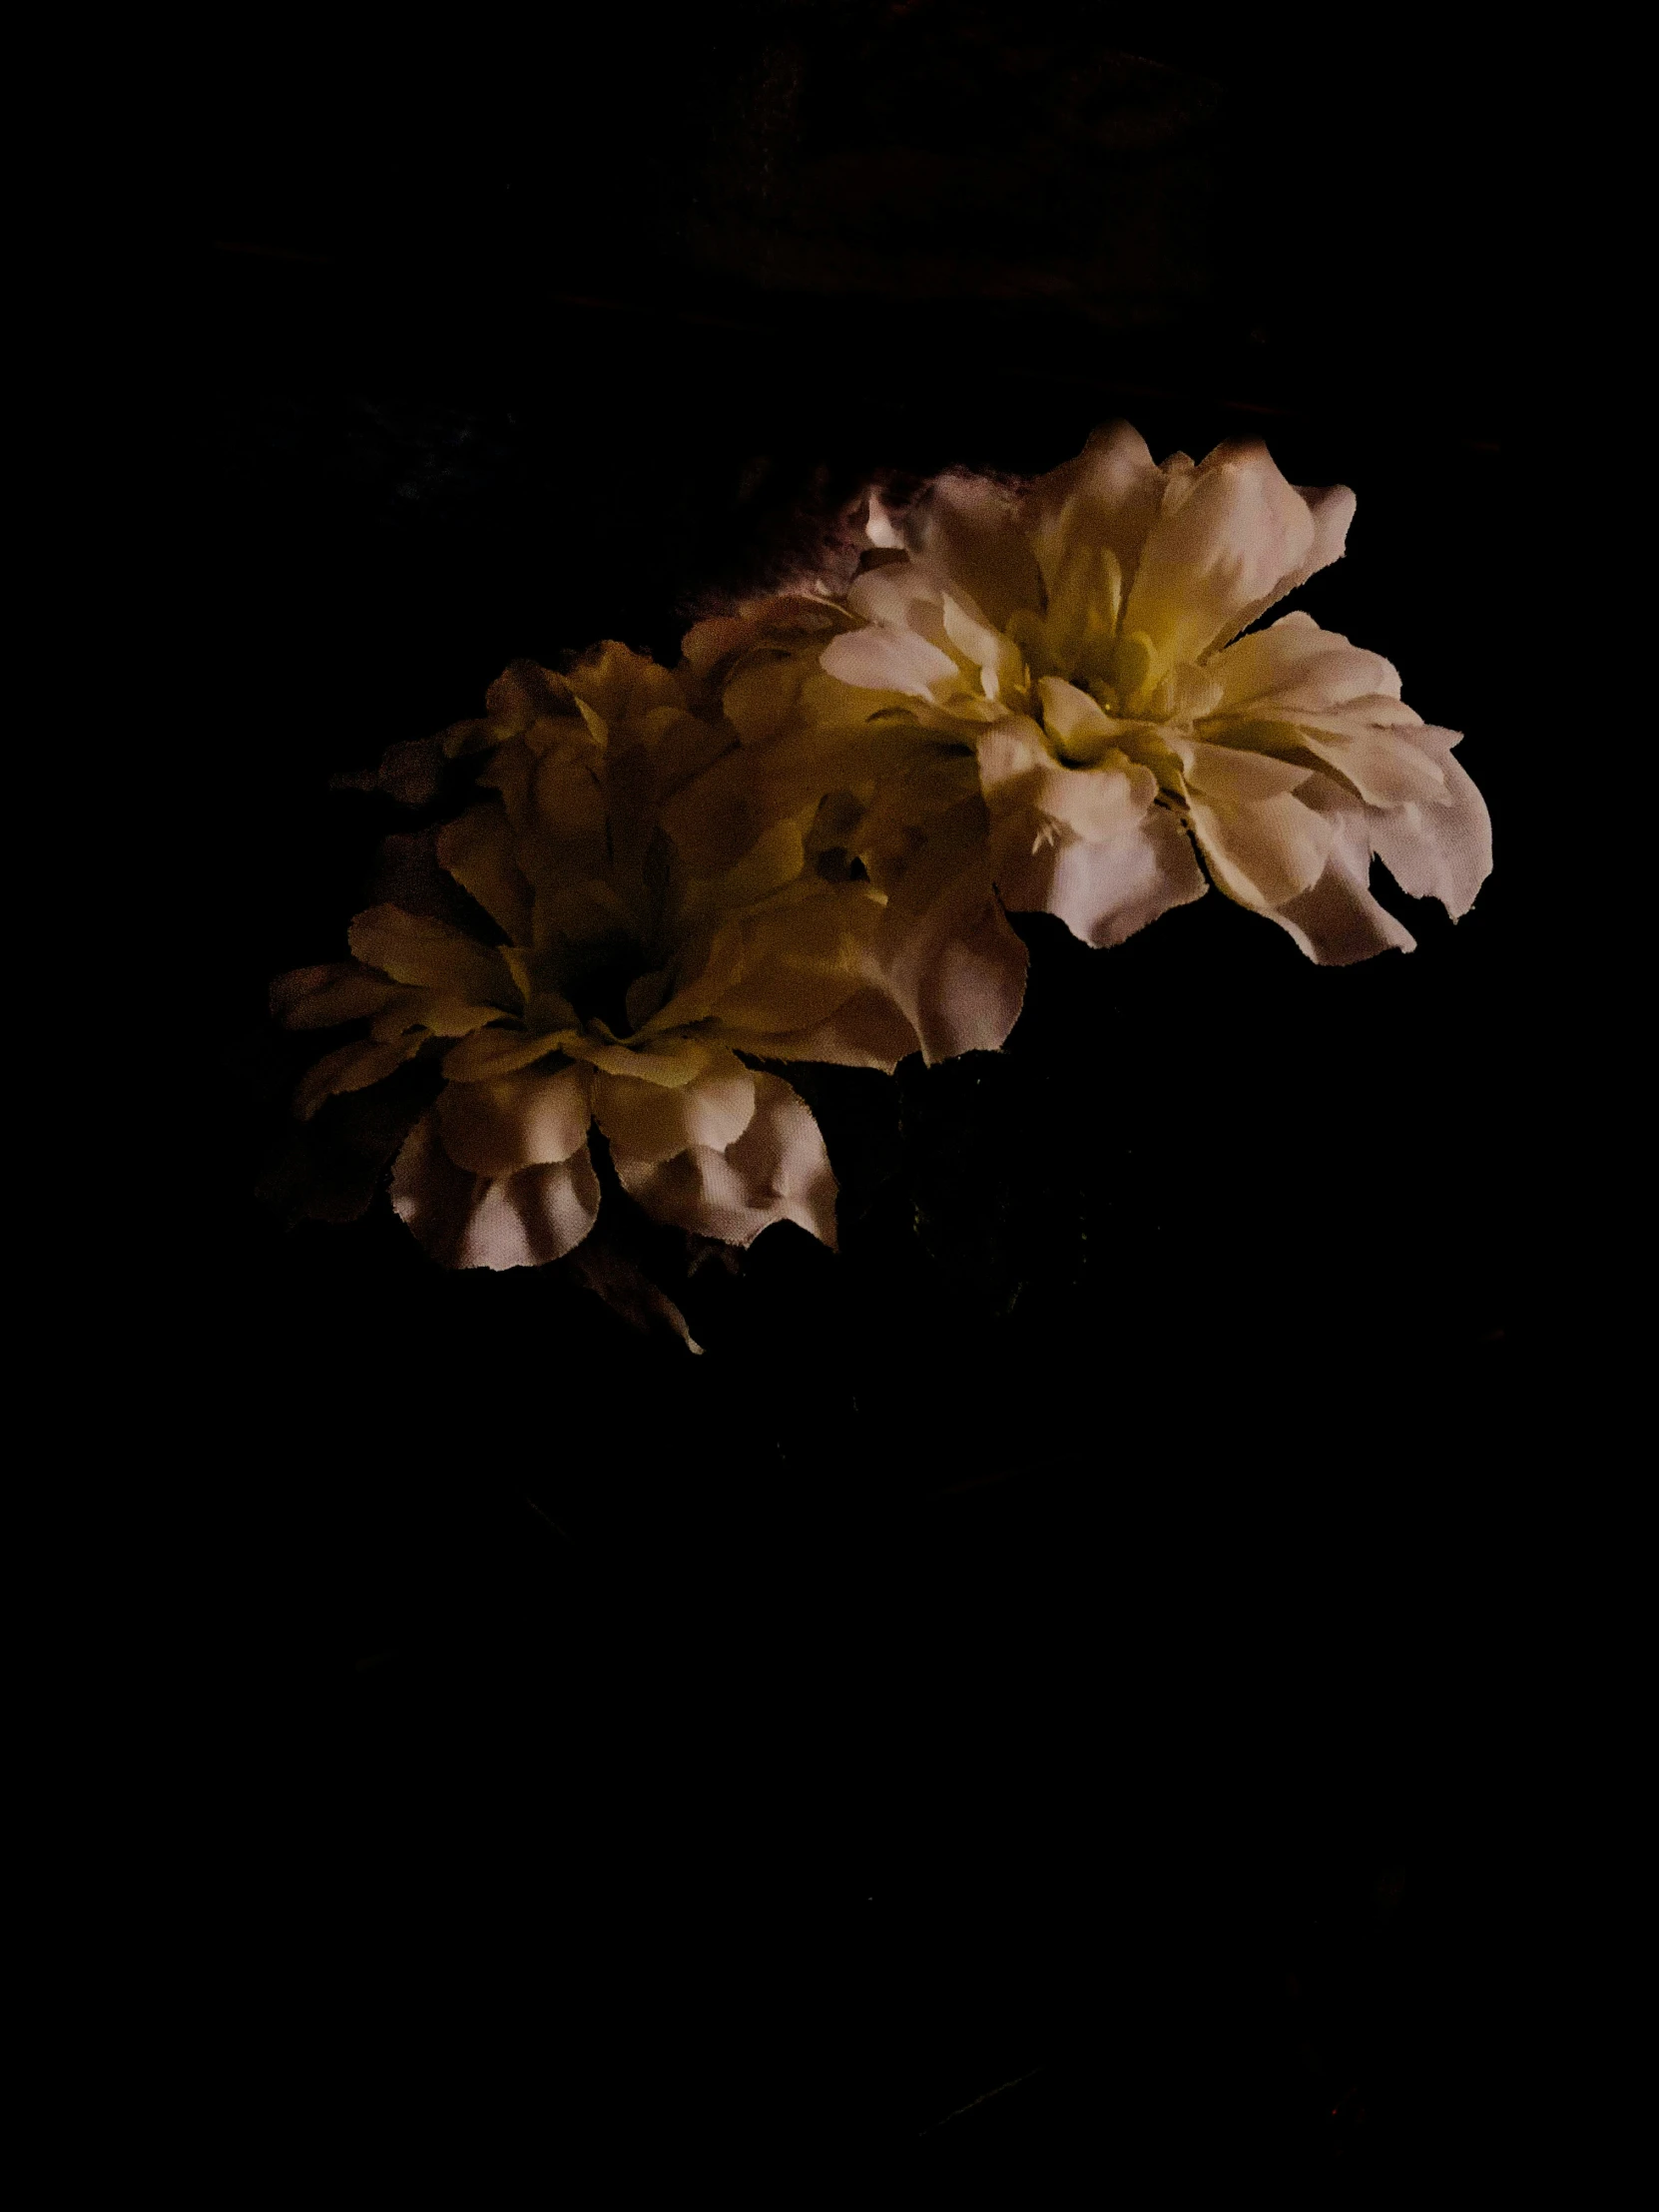 there is a vase with flowers on it in the dark